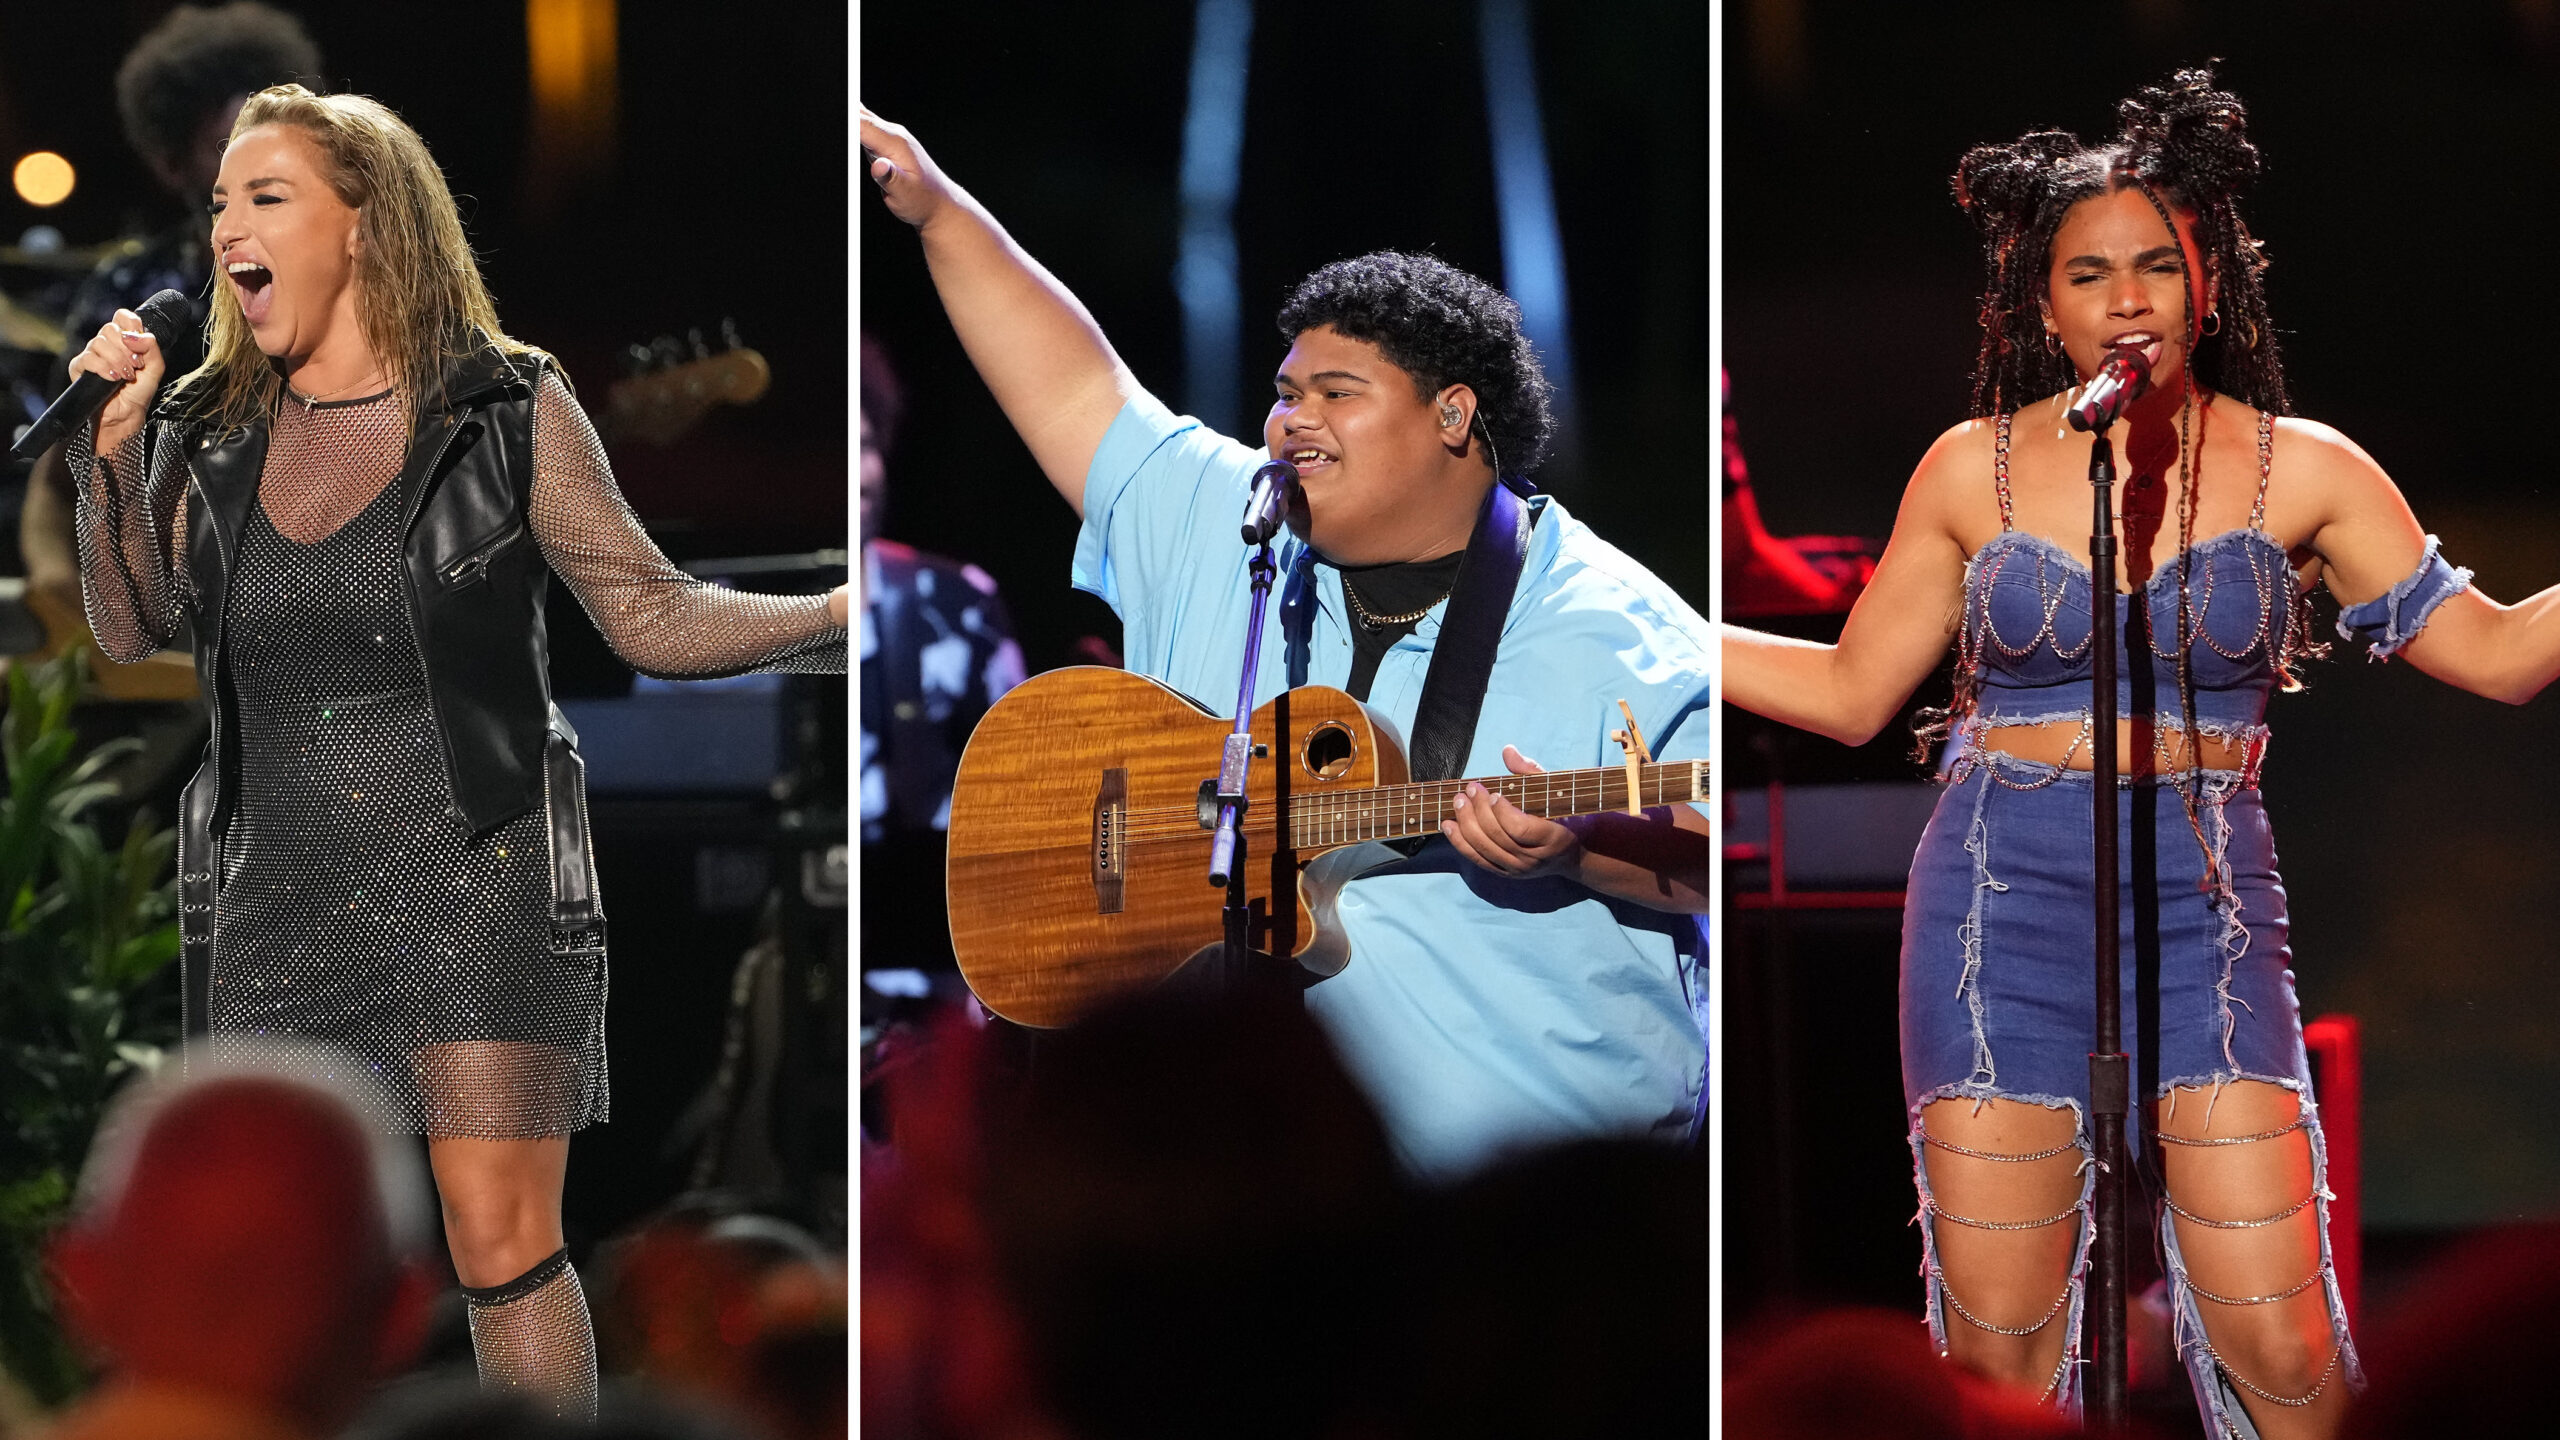 Discover The Last Contestant Standing On American Idol: The Untold Story